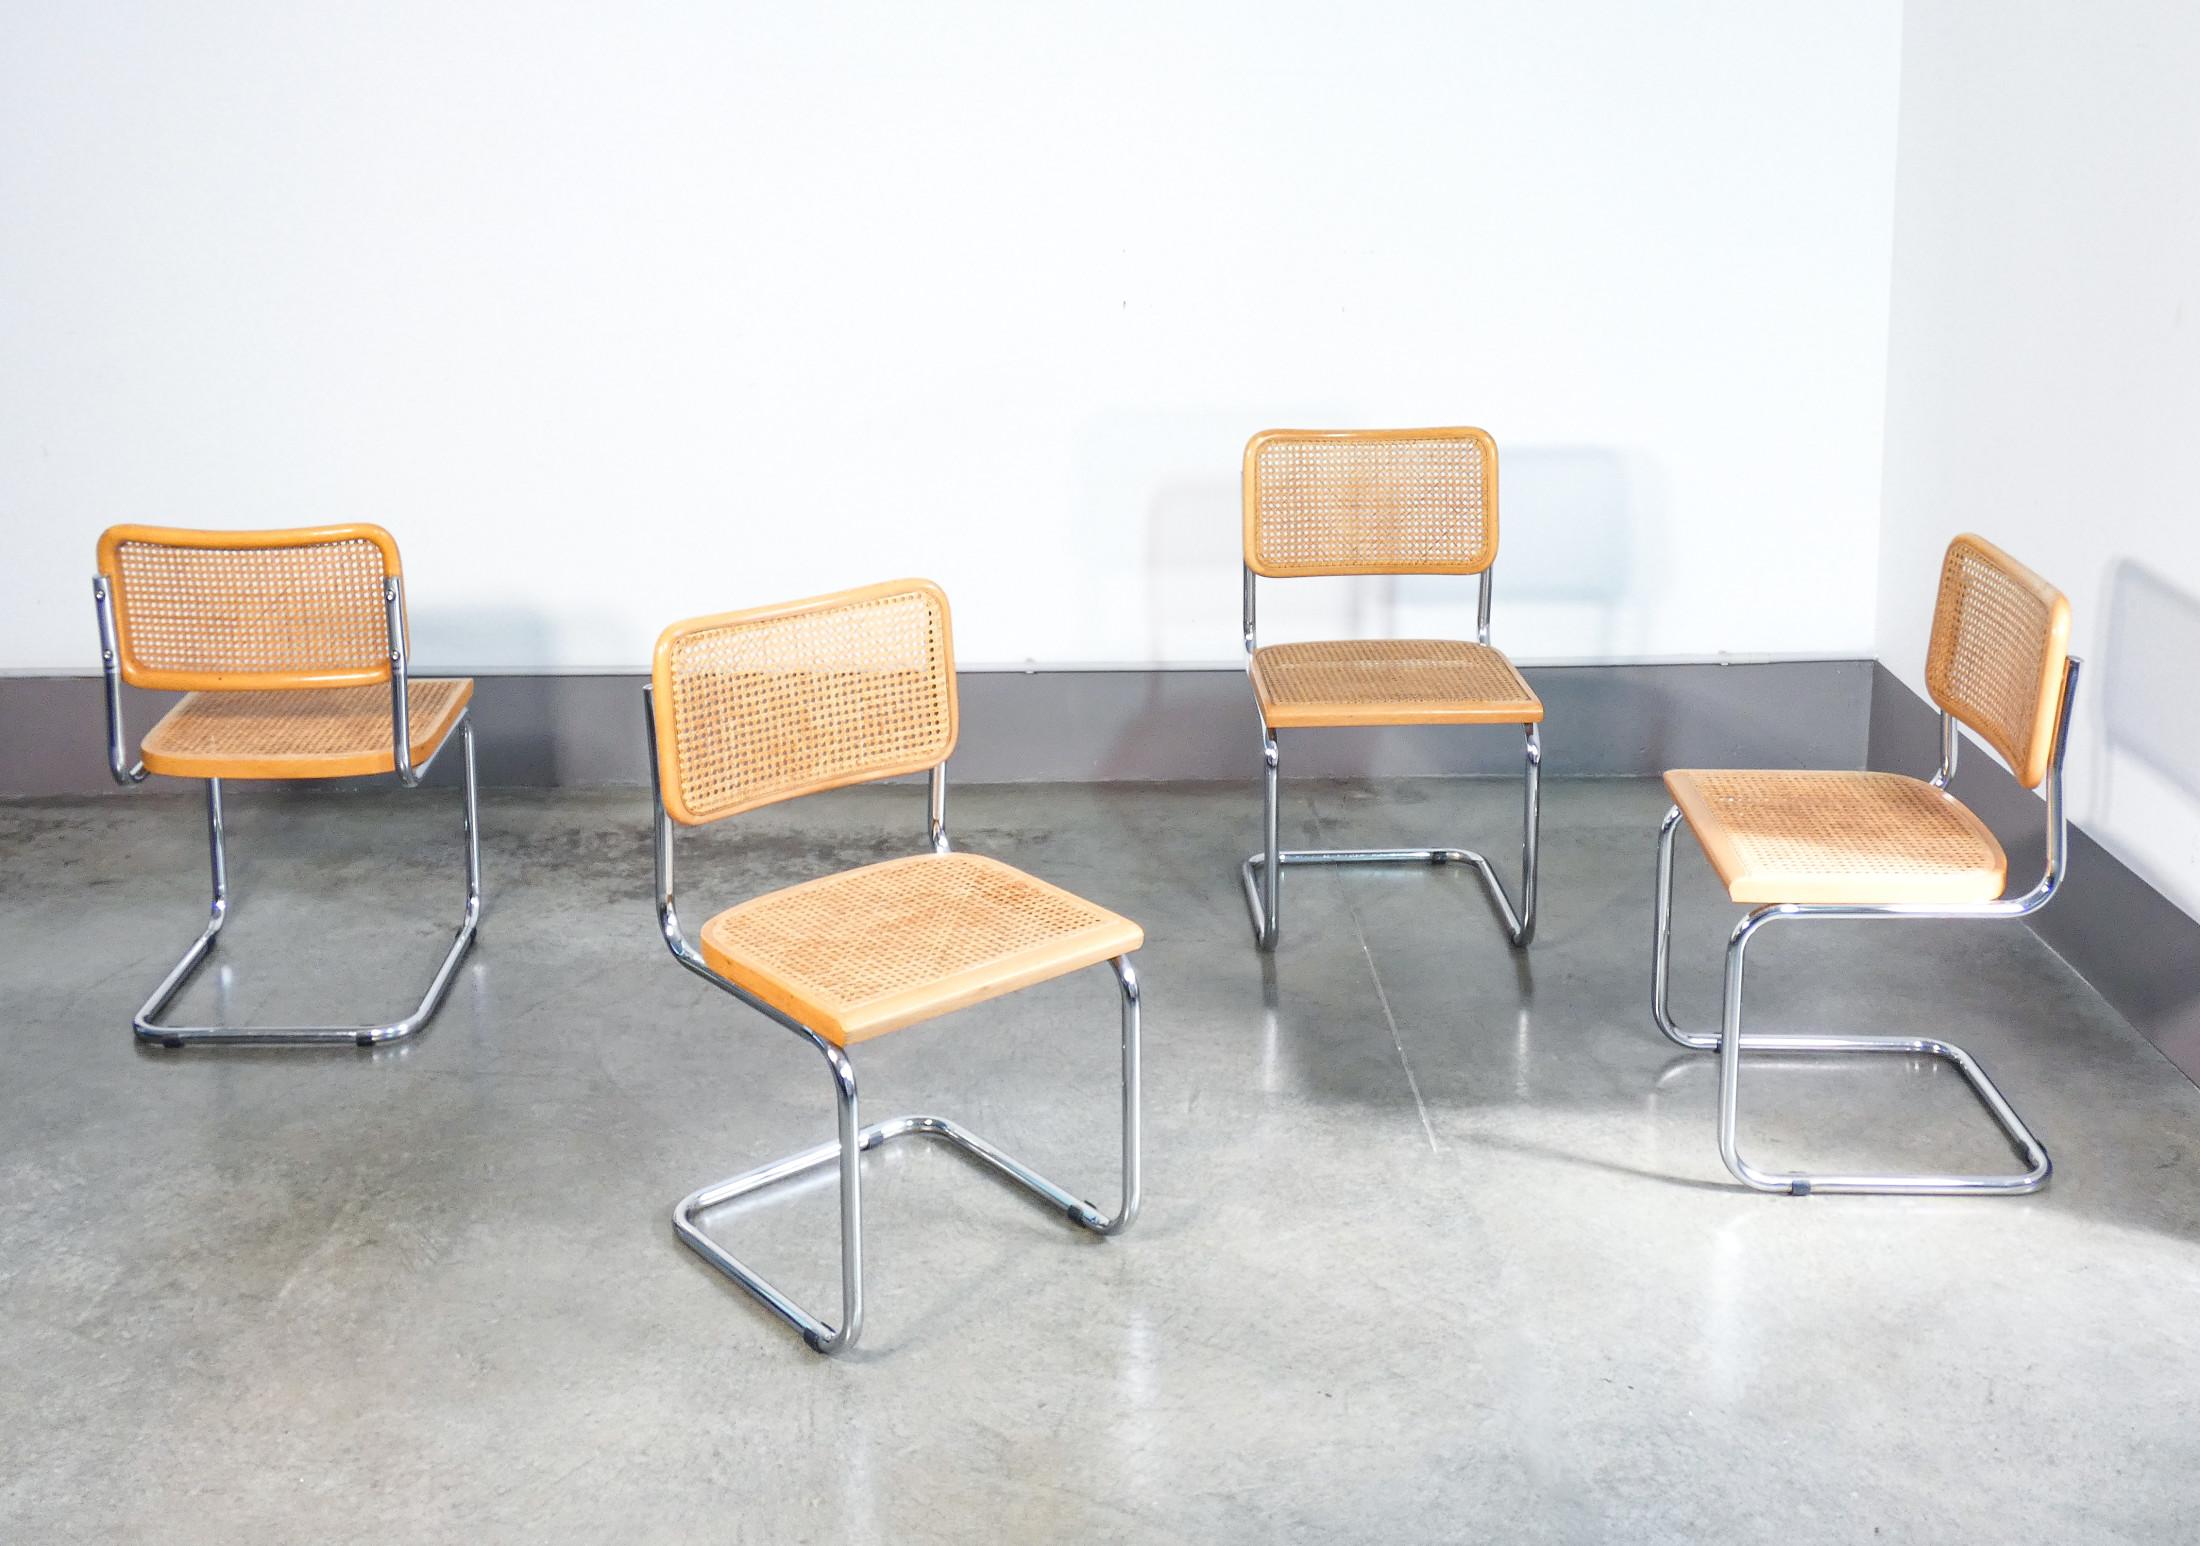 Set of four chairs
CESCA B32
design Marcel BREUER.

ORIGIN
Italy

PERIOD
1970s

DESIGNER
Marcel BREUER

MODEL
CESCA B32
In 1928 Marcel Breuer designed the B 32 chair, which was later named Cesca after the author's adopted daughter Francesca. The